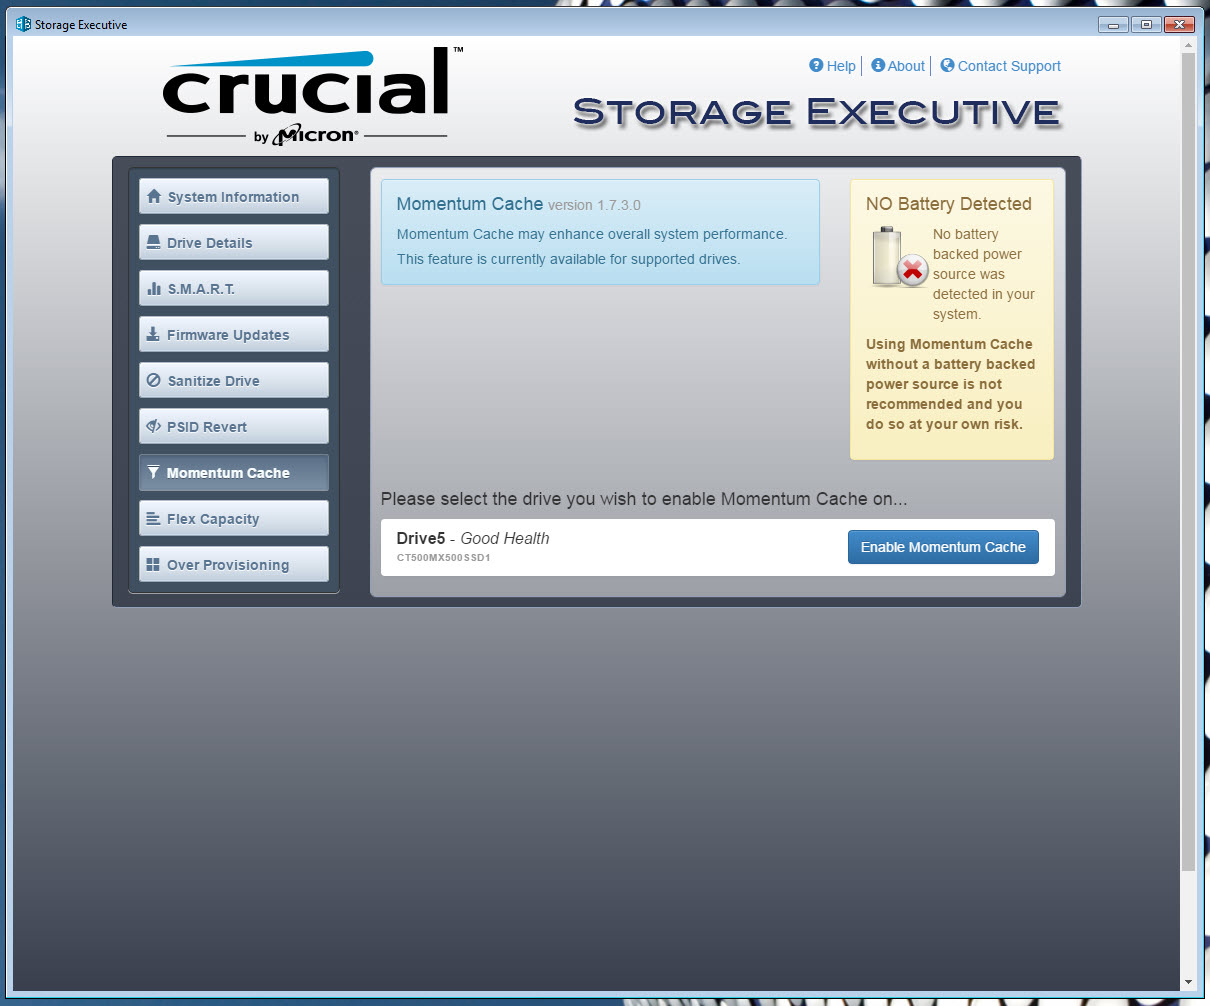 Achiever Computers on LinkedIn: #crucial #x9portable #ssd #external  #ssddrive #storage #performance #micron